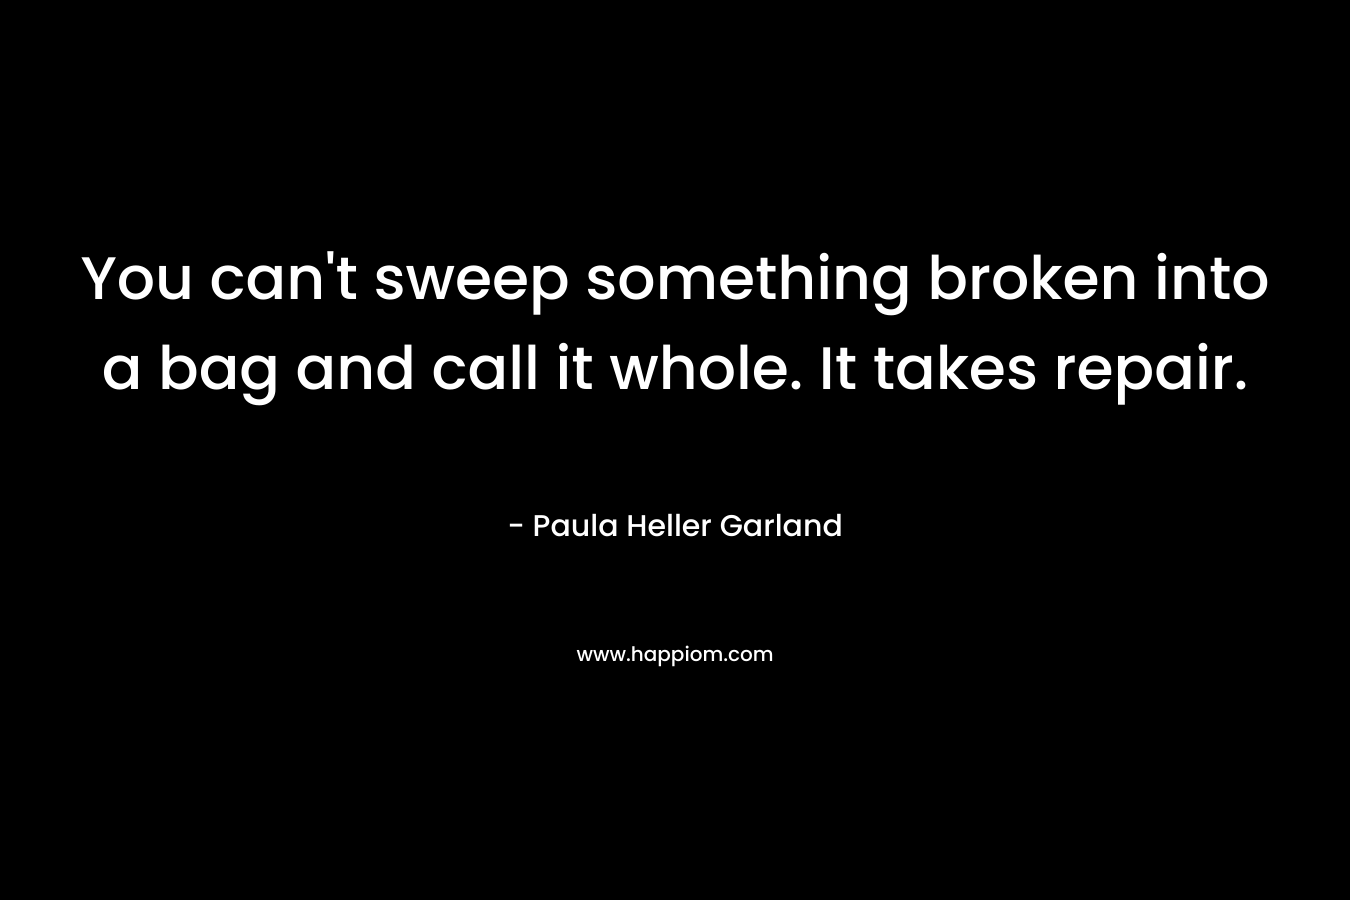 You can’t sweep something broken into a bag and call it whole. It takes repair. – Paula Heller Garland